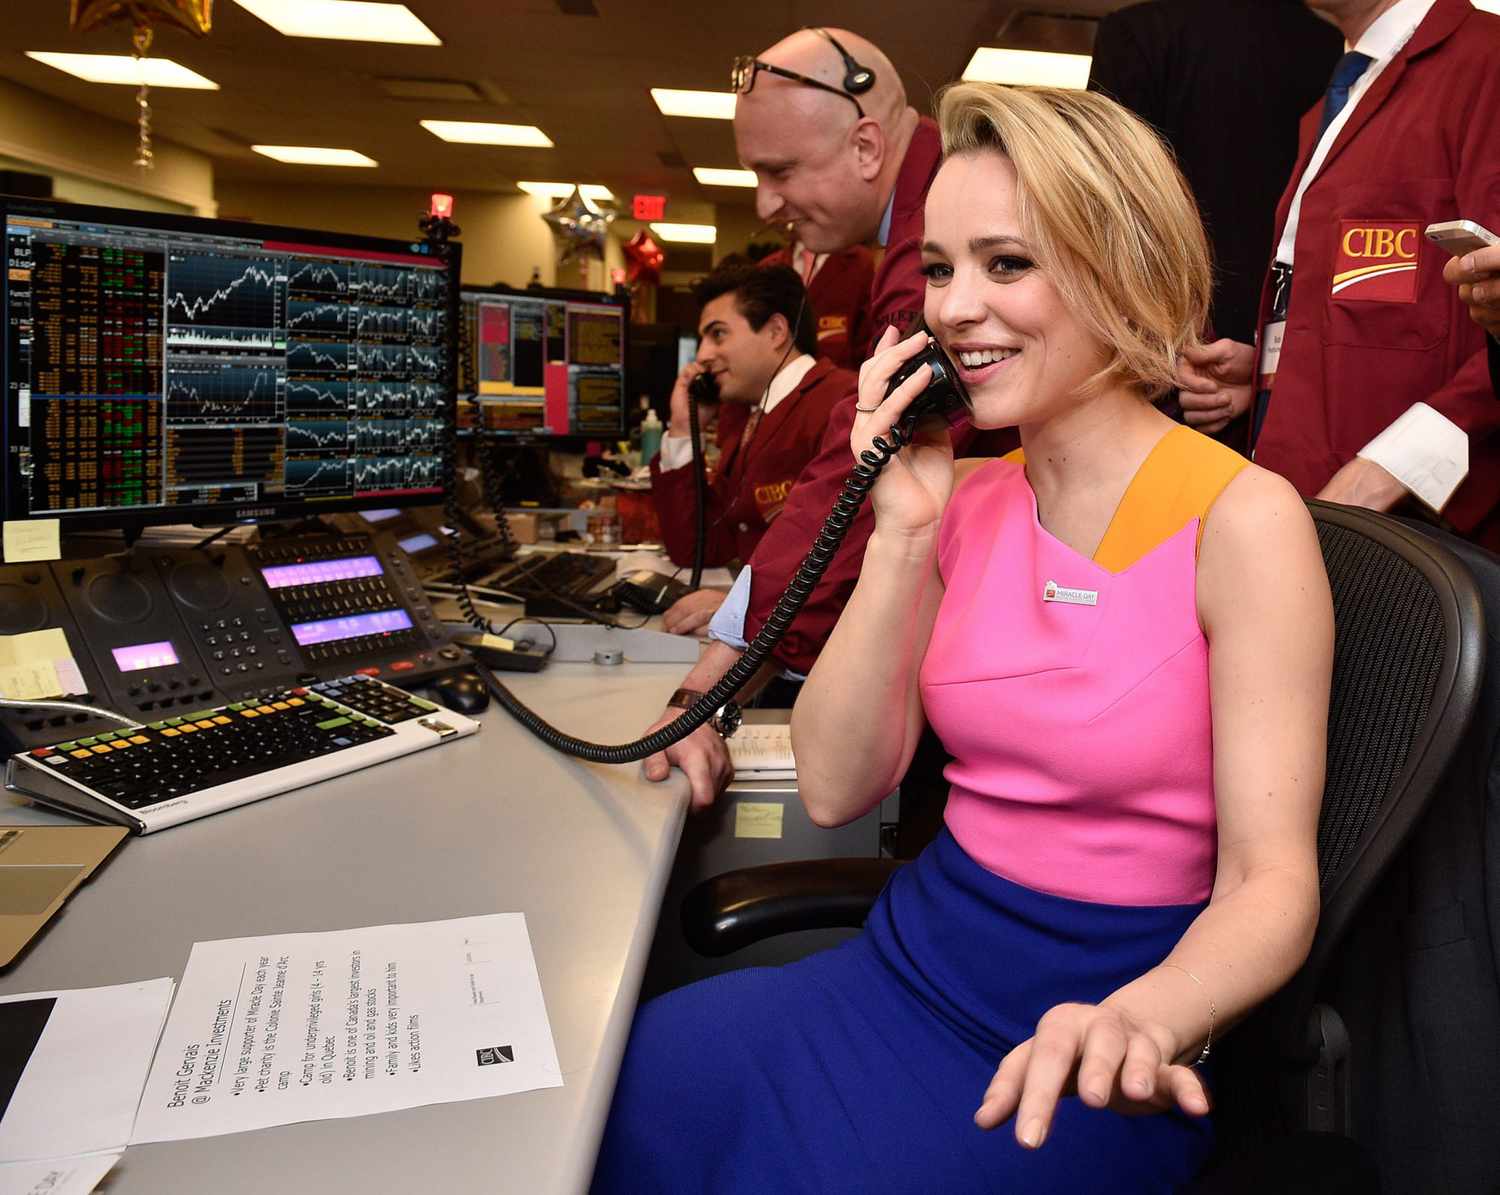 Celebrities Lend A Hand To Raise Millions For Kids In Need on The 31st Anniversary of CIBC Miracle Day